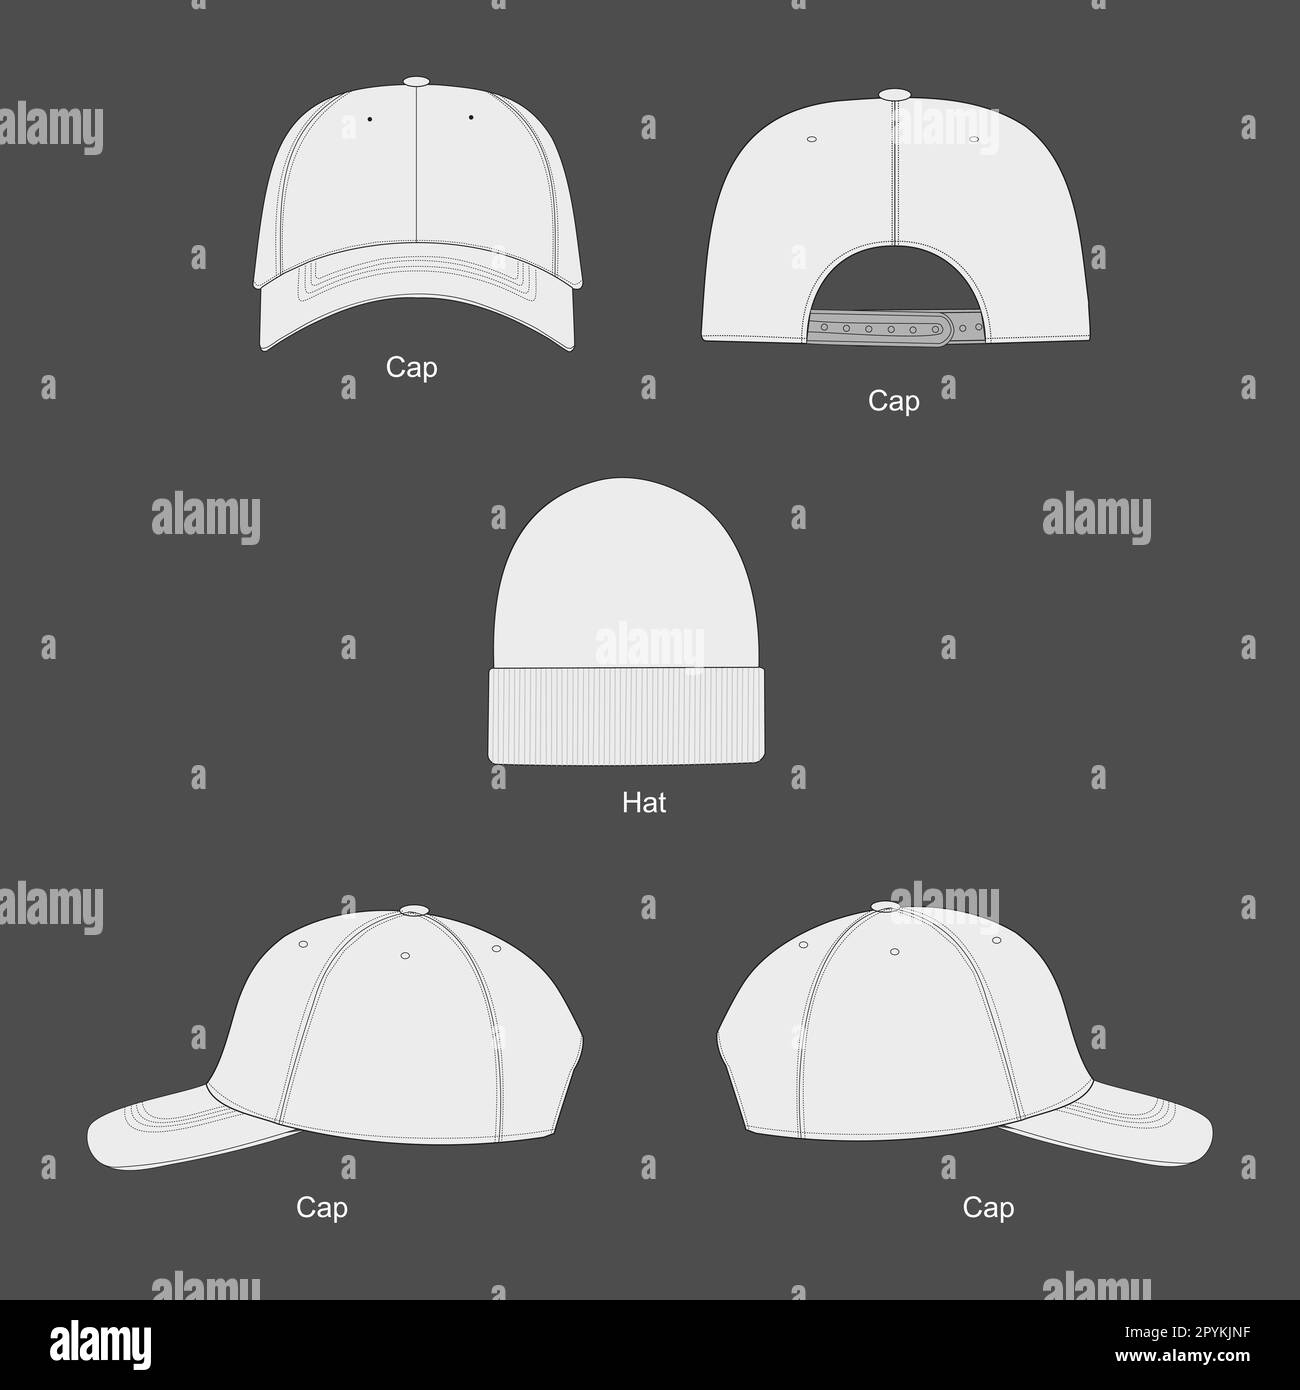 Set of hats. Plain Baseball Cap. Trucker Hat Snap back Technical Drawing Illustration Blank Street wear Mock-up Template for Design and Tech Packs CAD Stock Vector